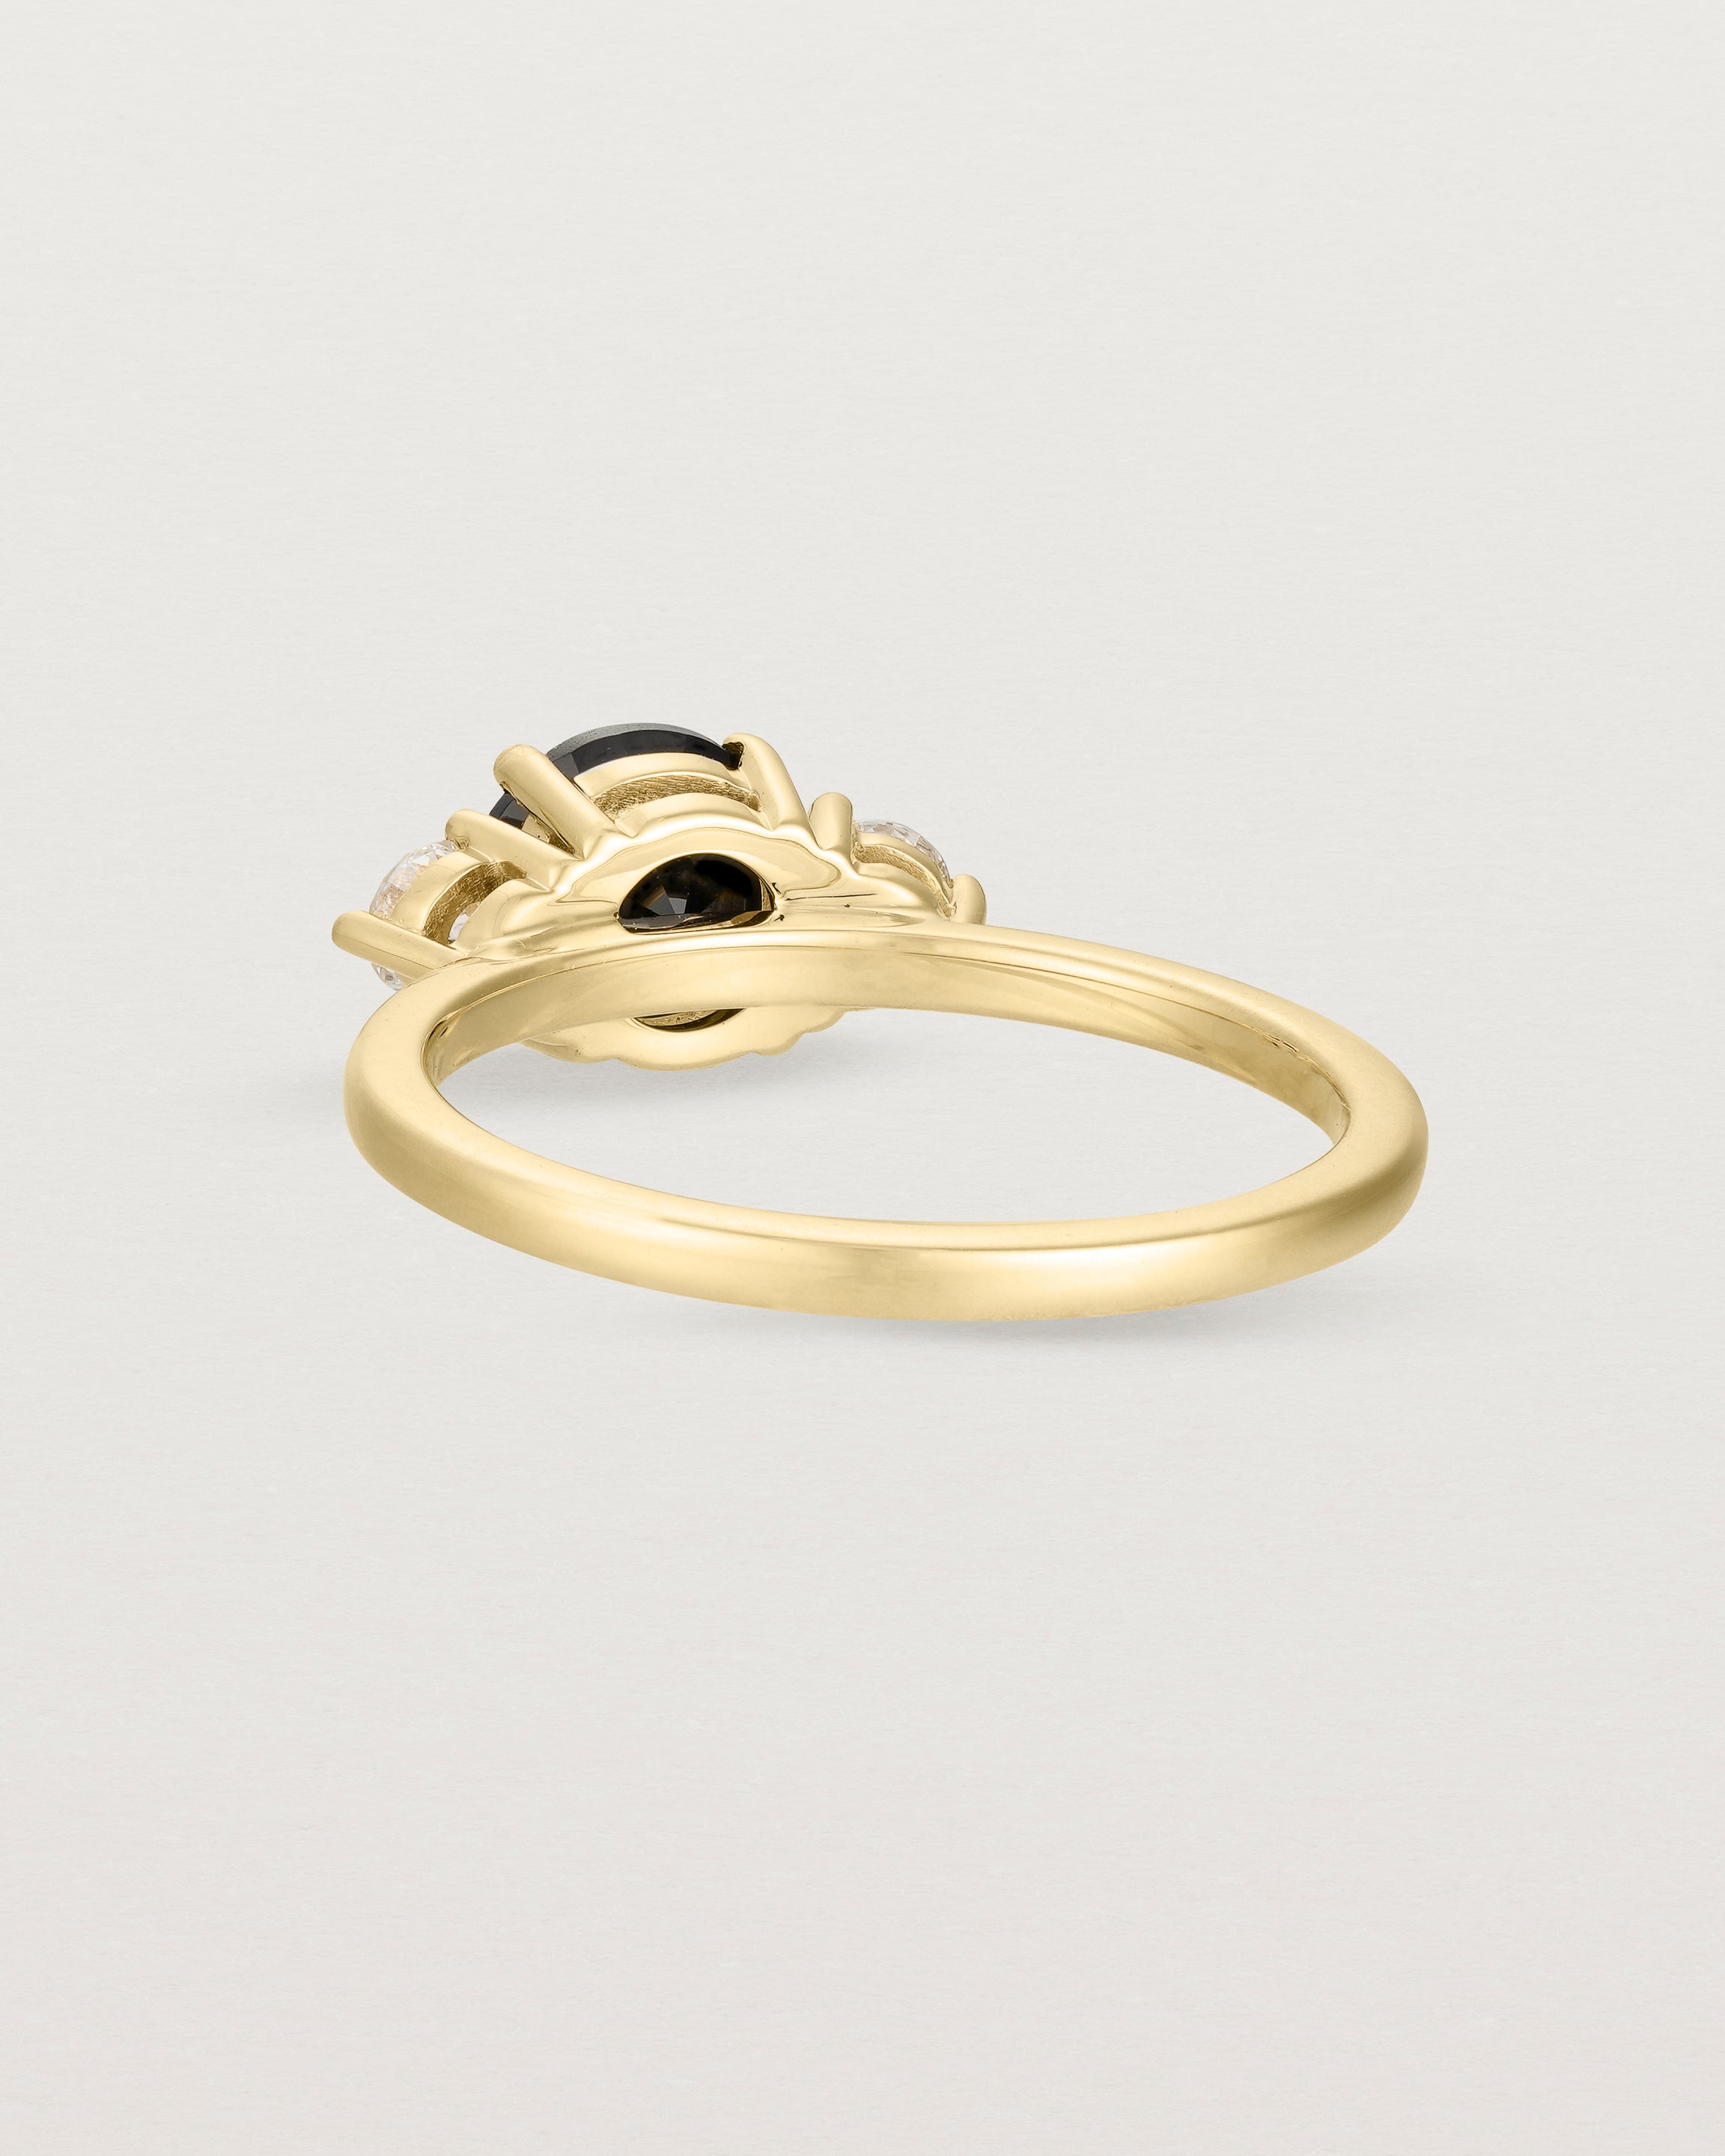 Back view of the Petite Una Round Trio Ring | Black Spinel & Diamonds | Yellow Gold.